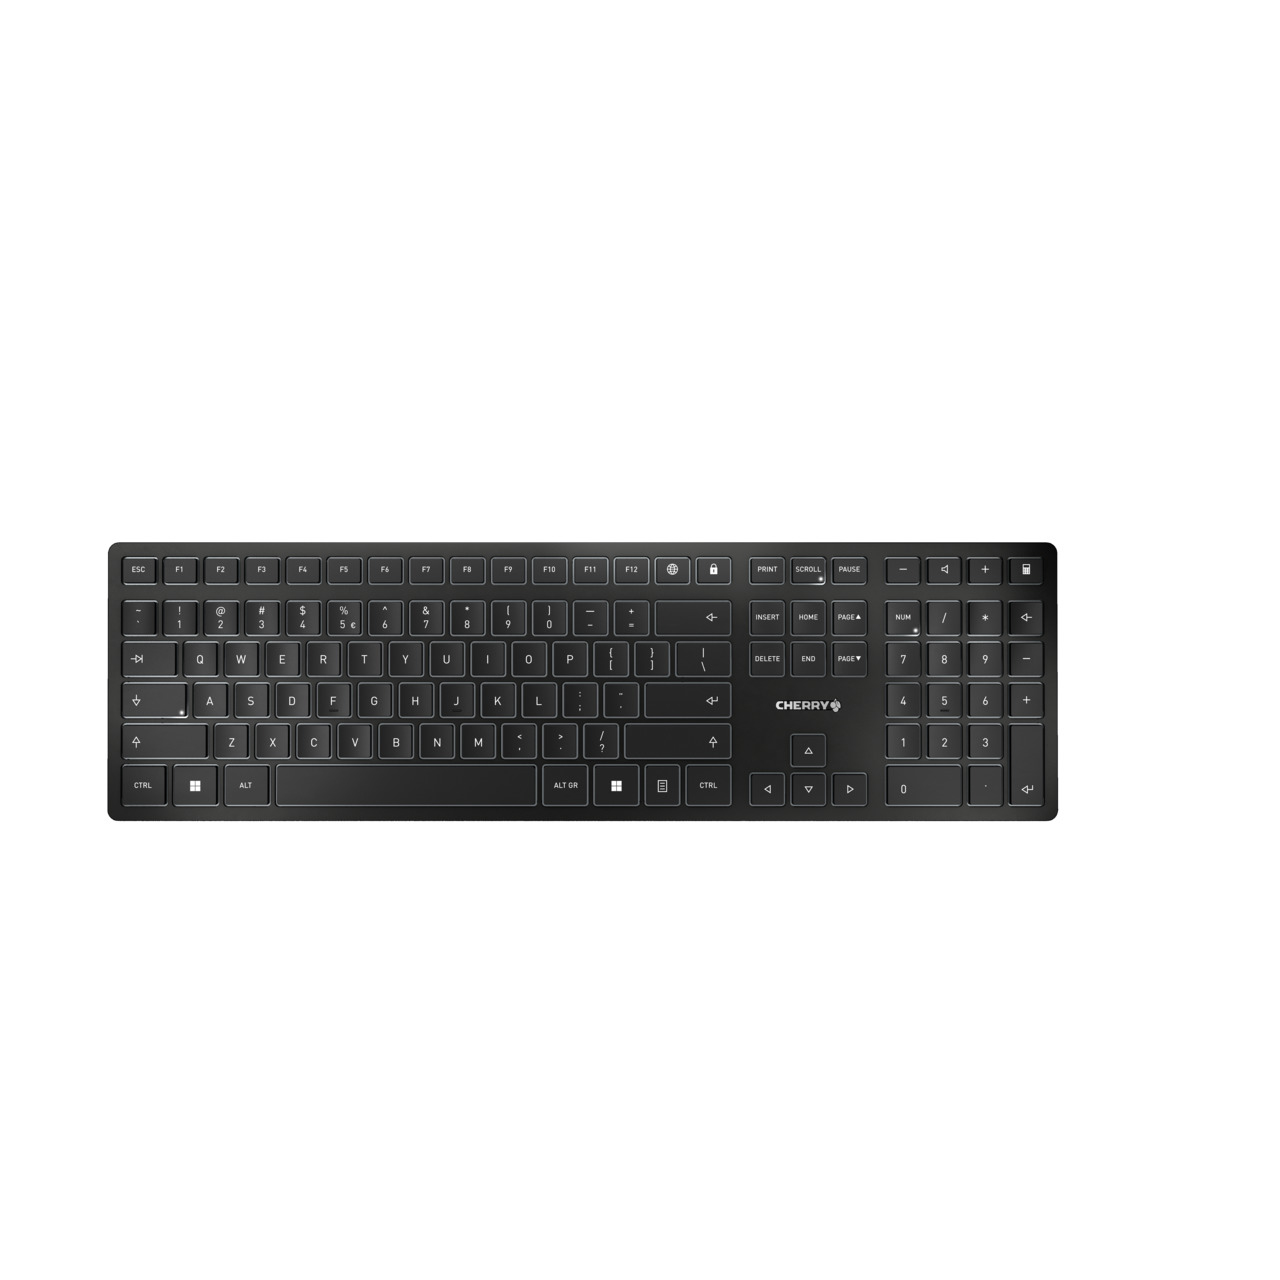  KW 9100 SLIM Keyboard and Mouse